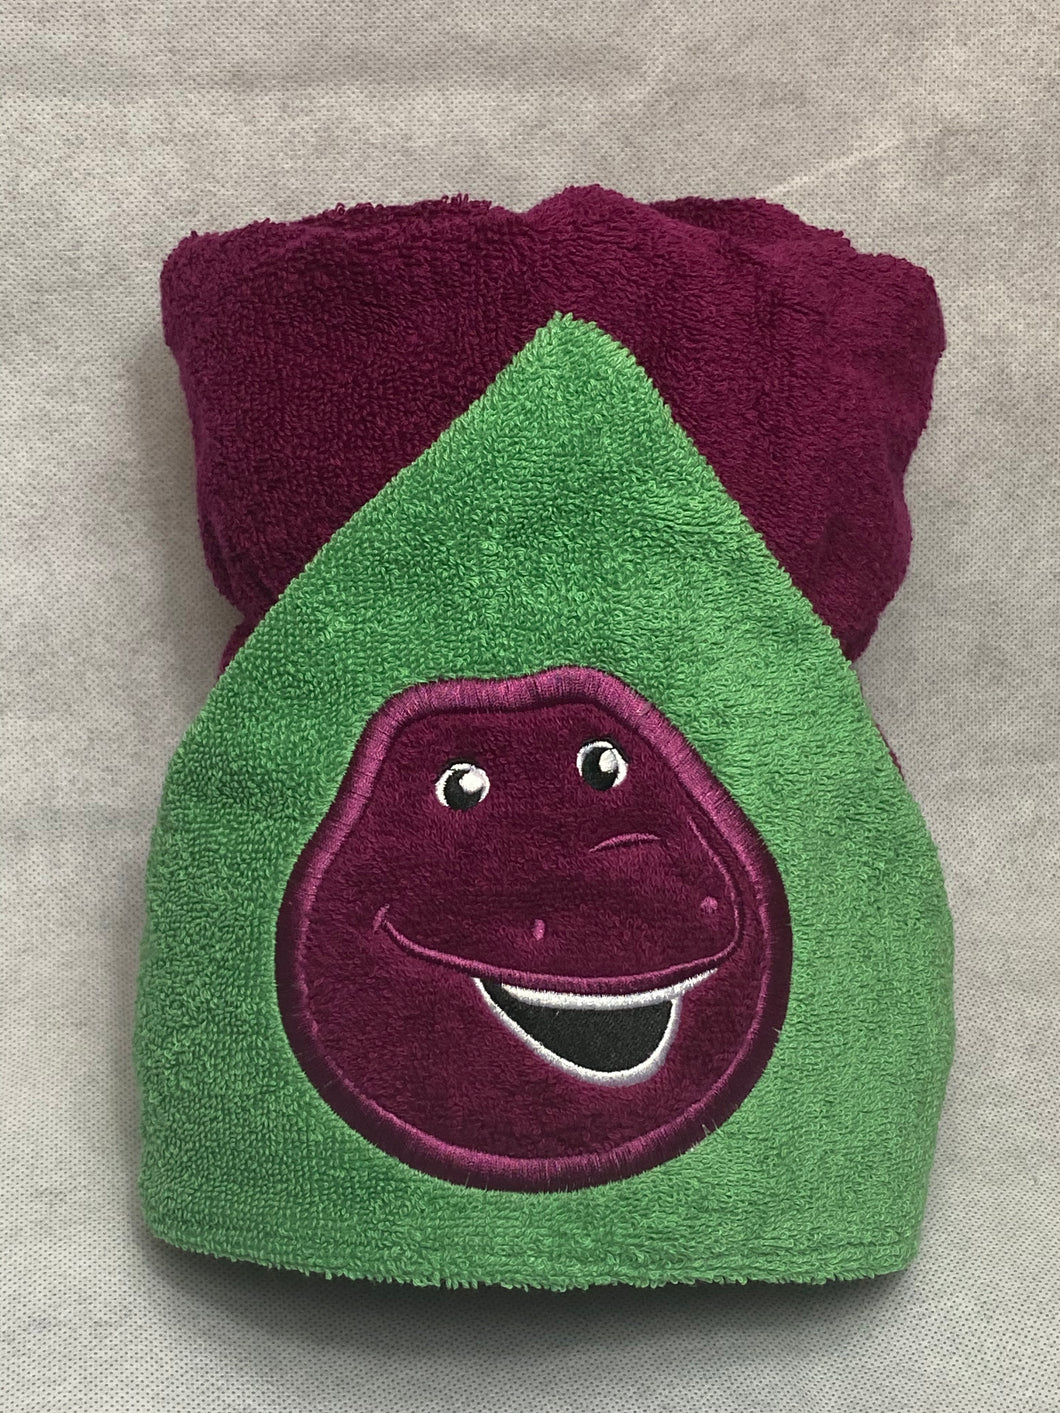 Dino character hooded towel